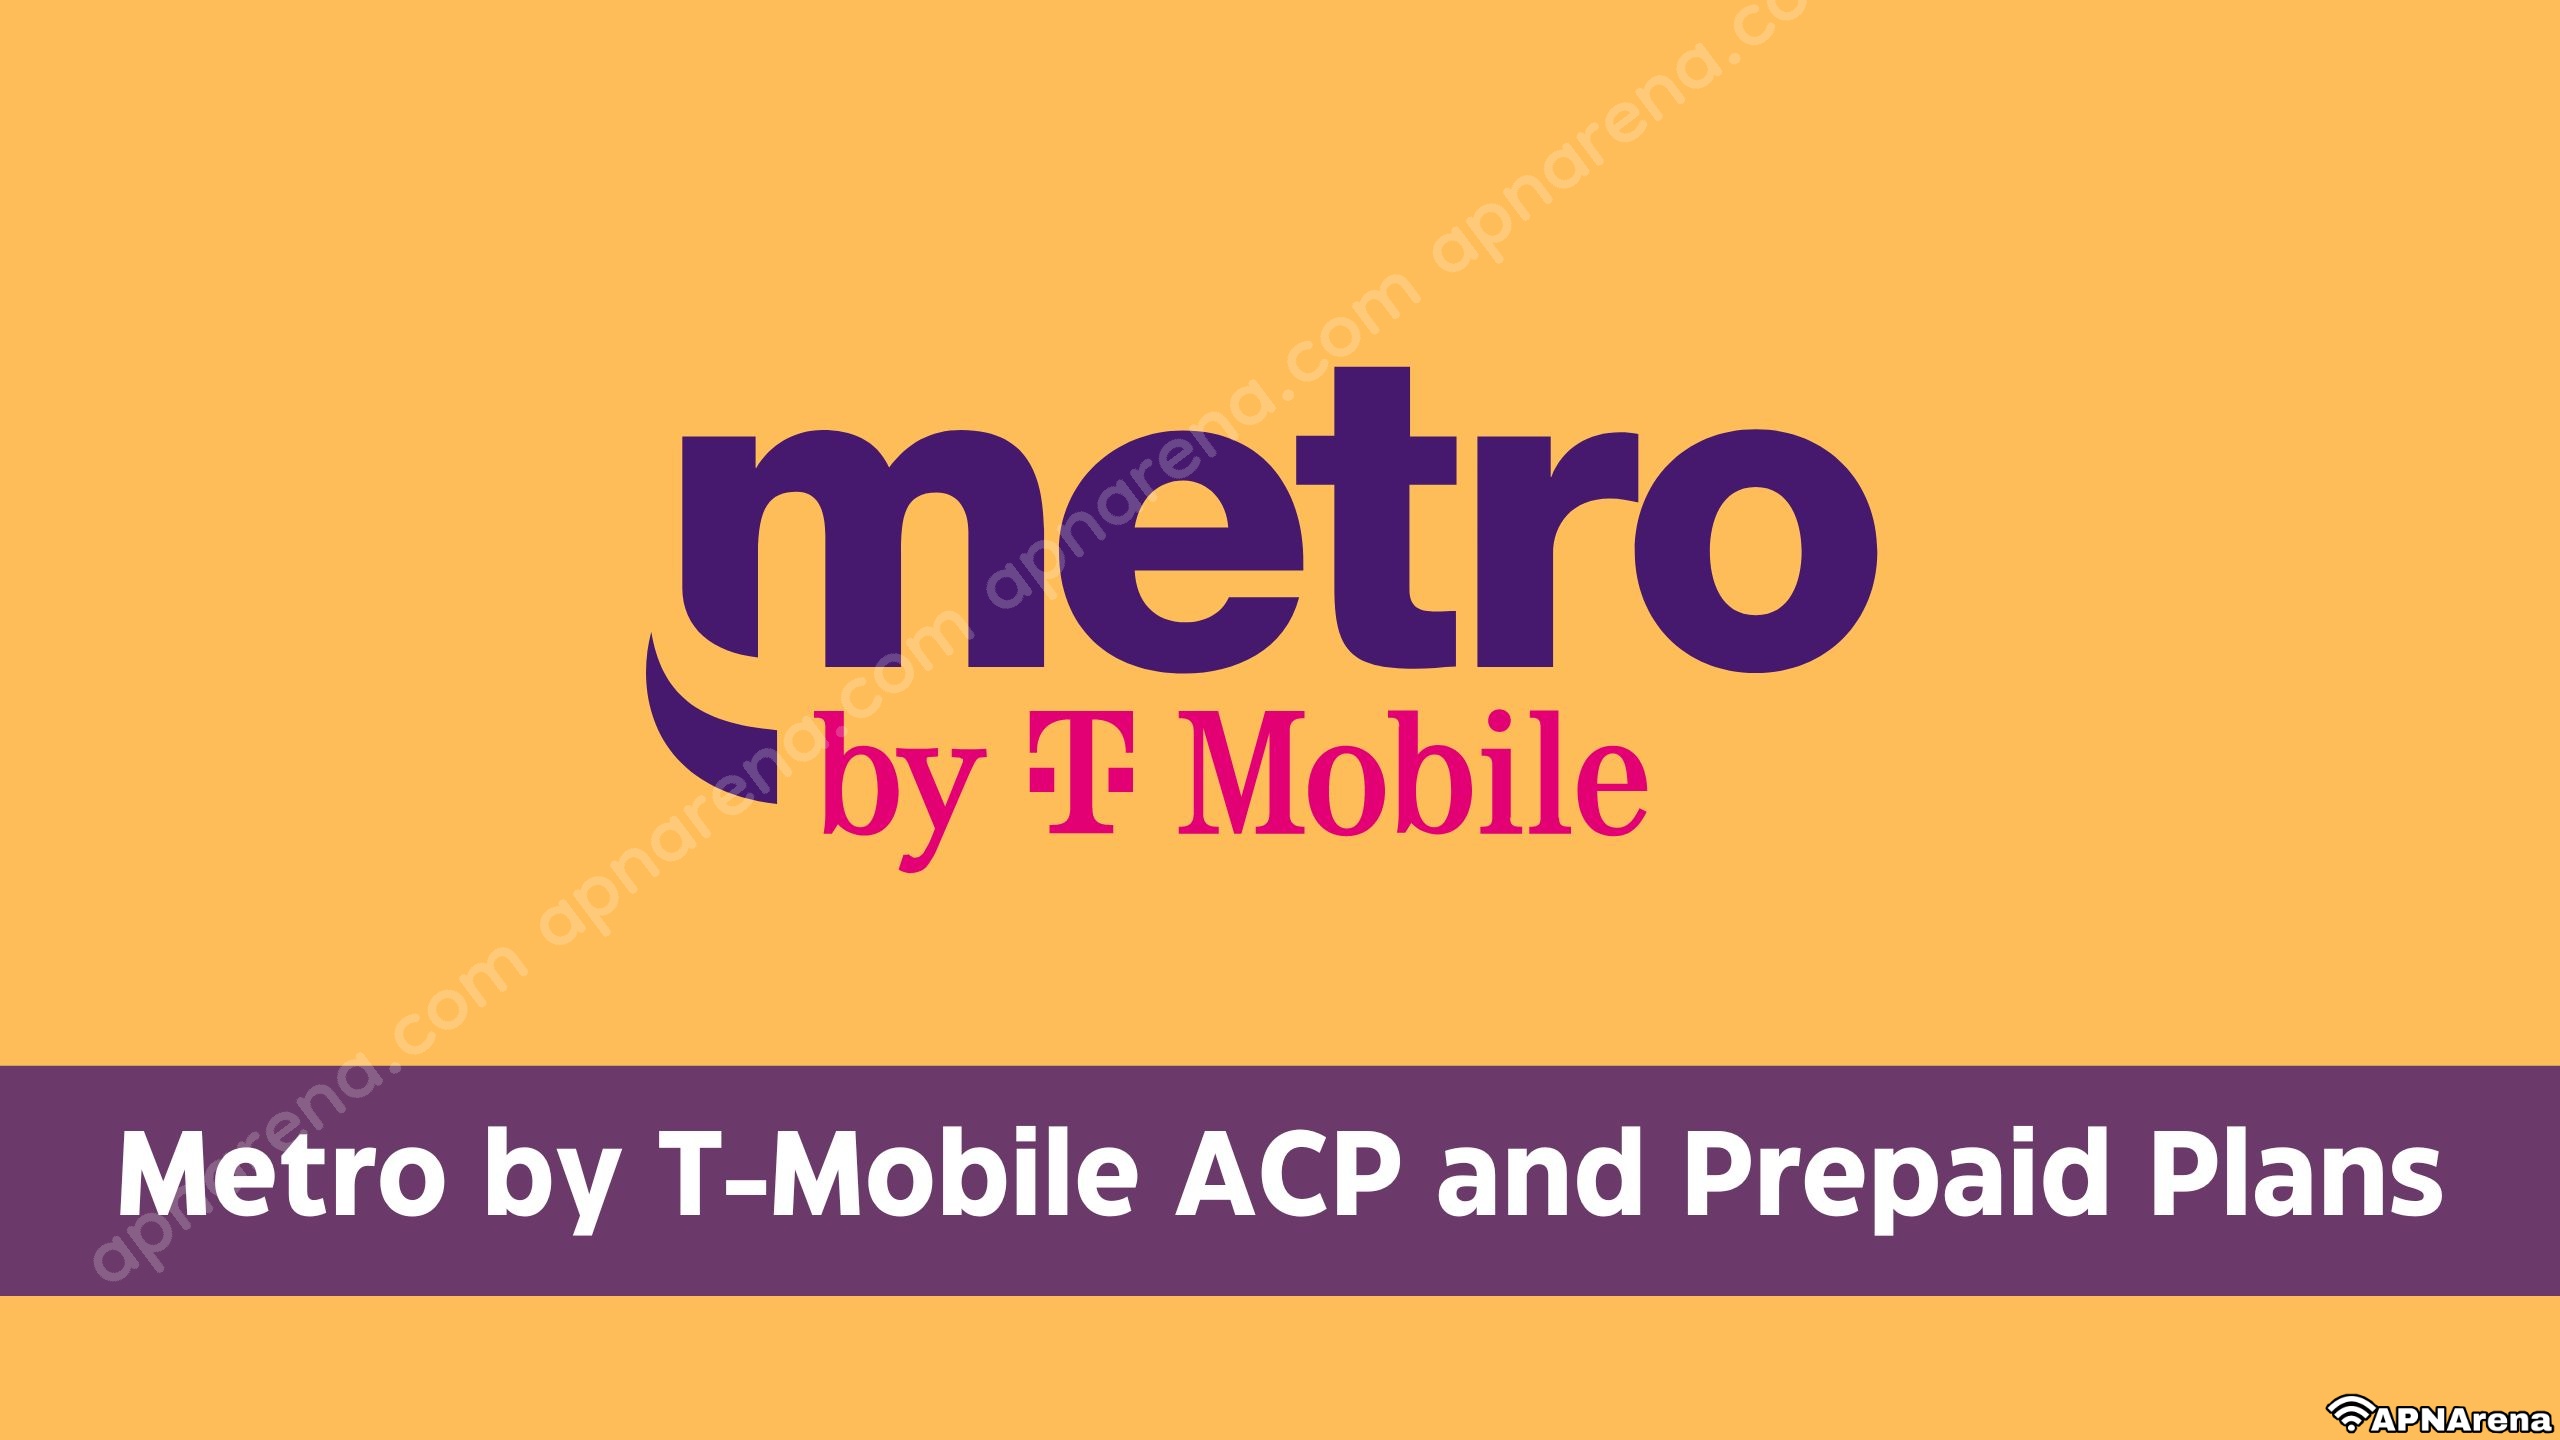 Metro by T-Mobile ACP and Prepaid Plans | Free & Unlimited 5G Data, Call Text & Home Internet